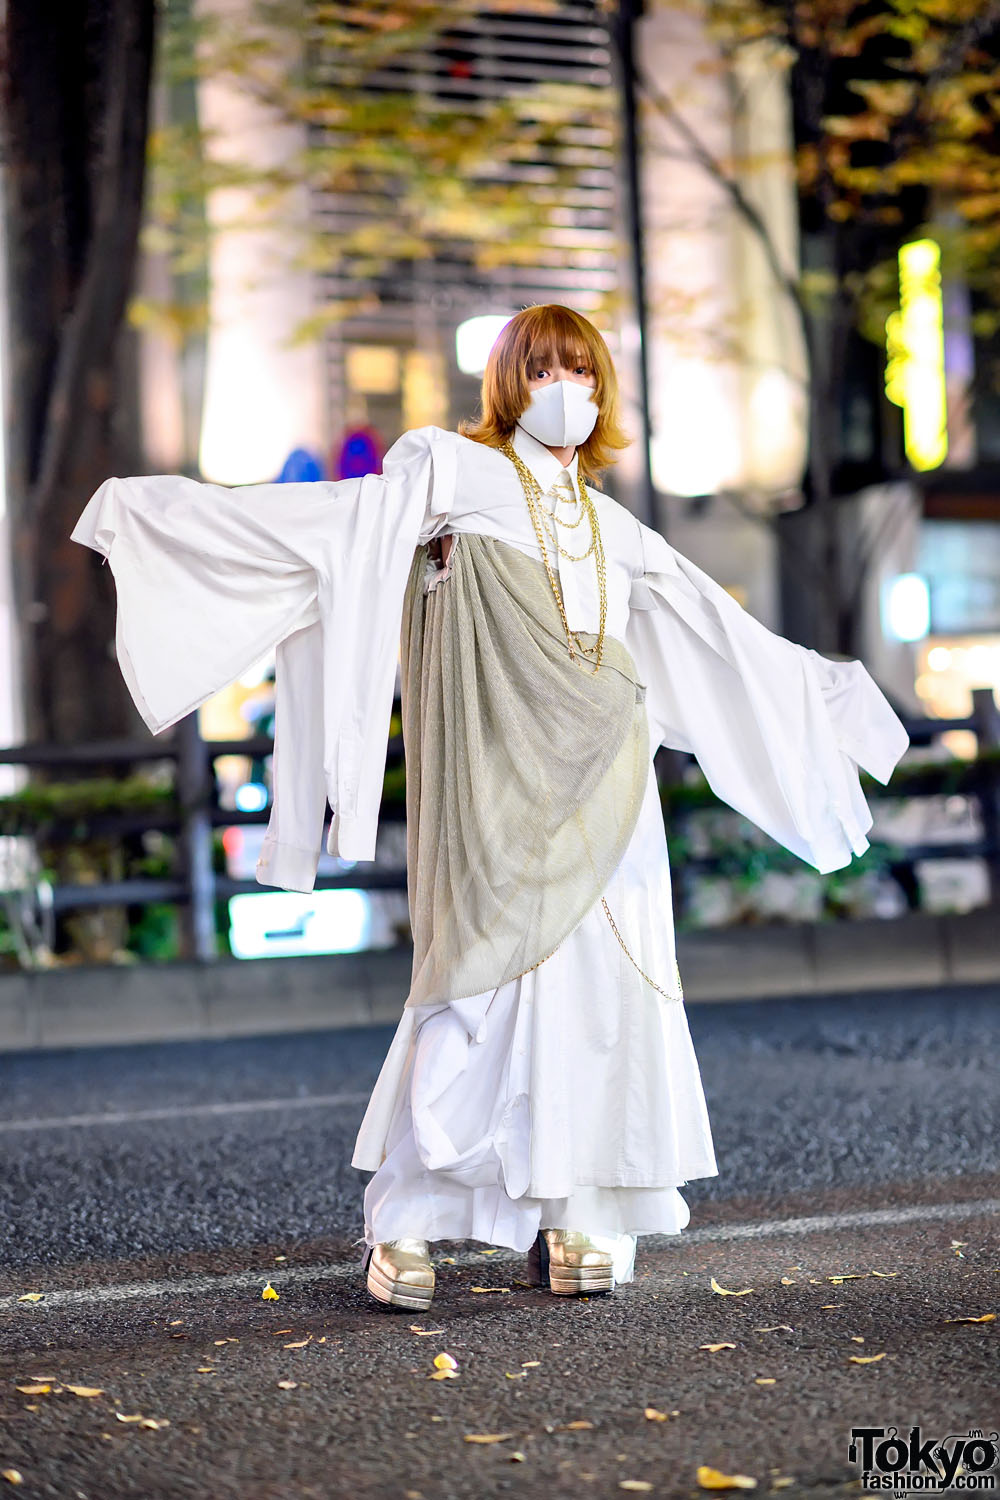 Harajuku Guy in Handmade Remake Street Style w/ Oversized Sleeves, Gold Chains & Platform Boots